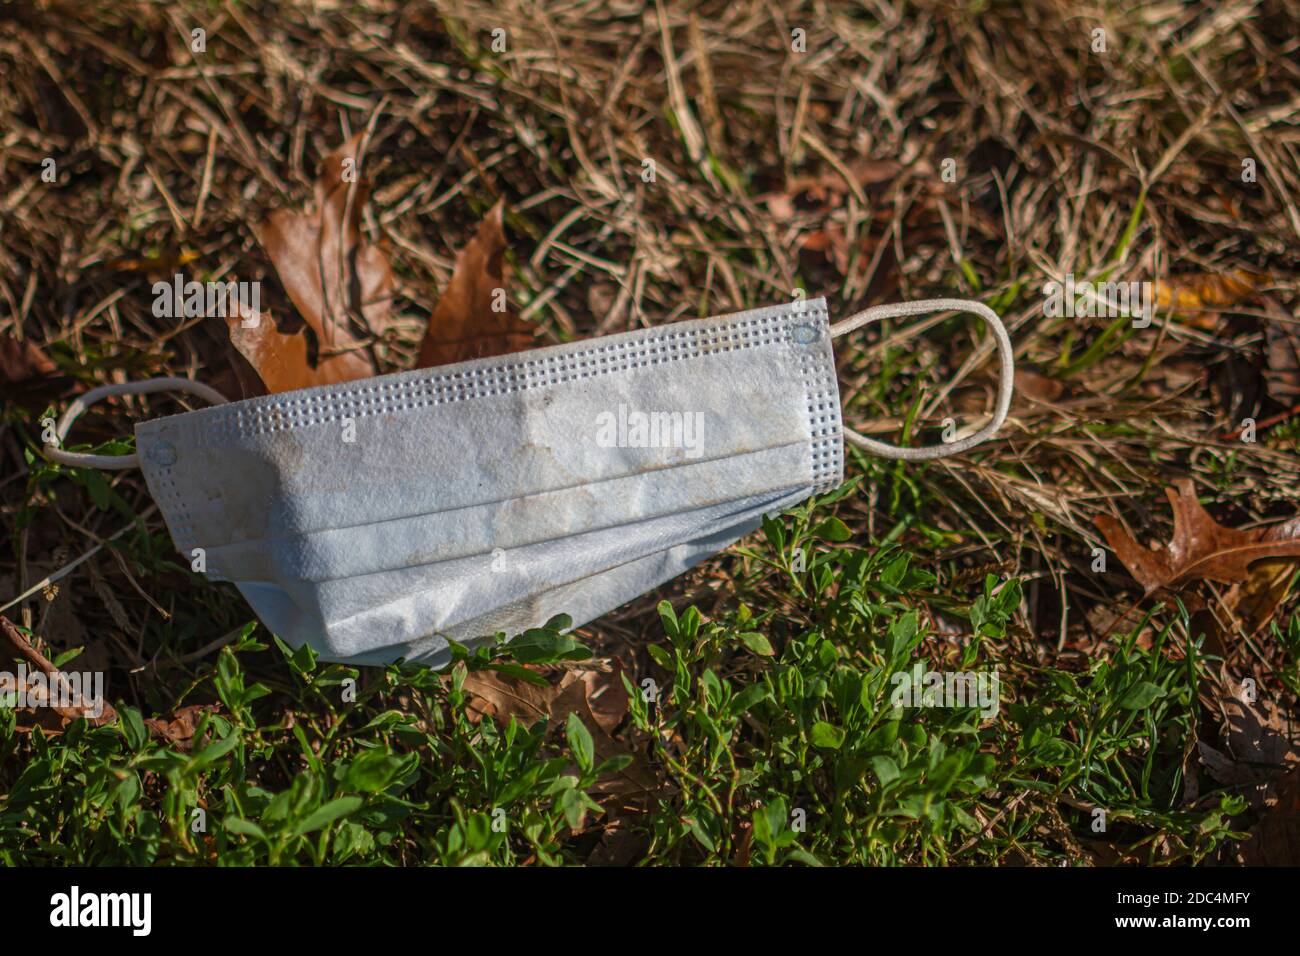 Discarded face masks in Mccarren Park, Brooklyn, New York during the COVID-19 pandemic in the Fall of 2020. Stock Photo